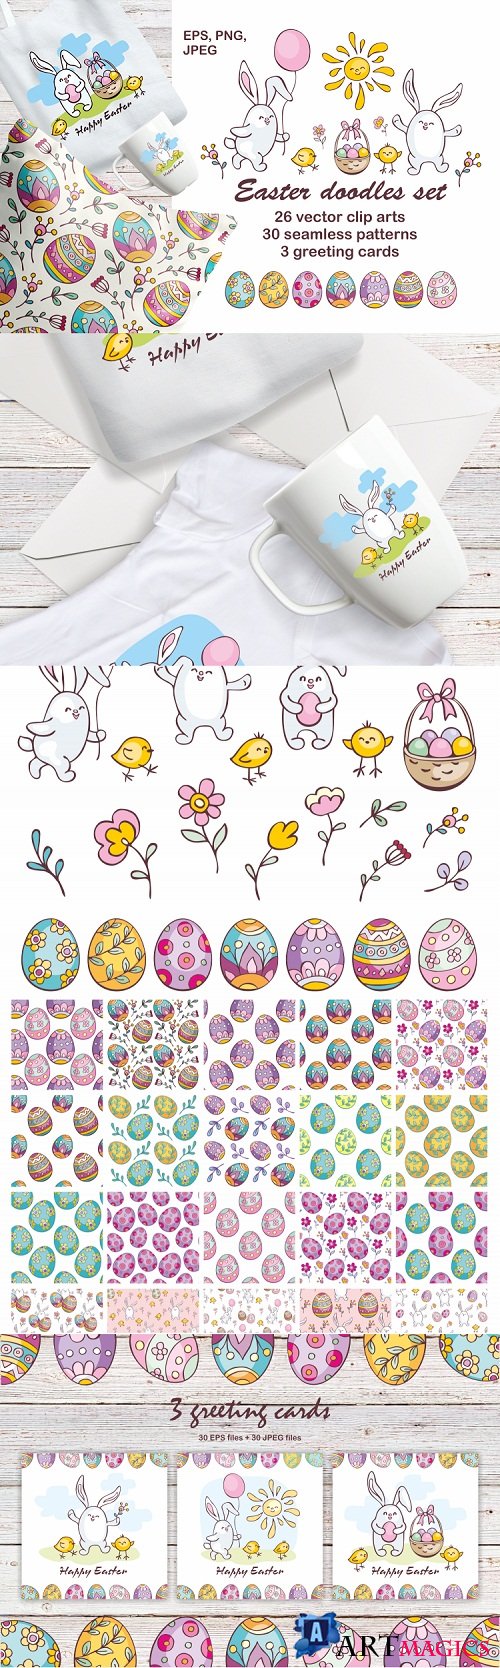 Easter doodles set. Vector clip arts and seamless patterns - 61183